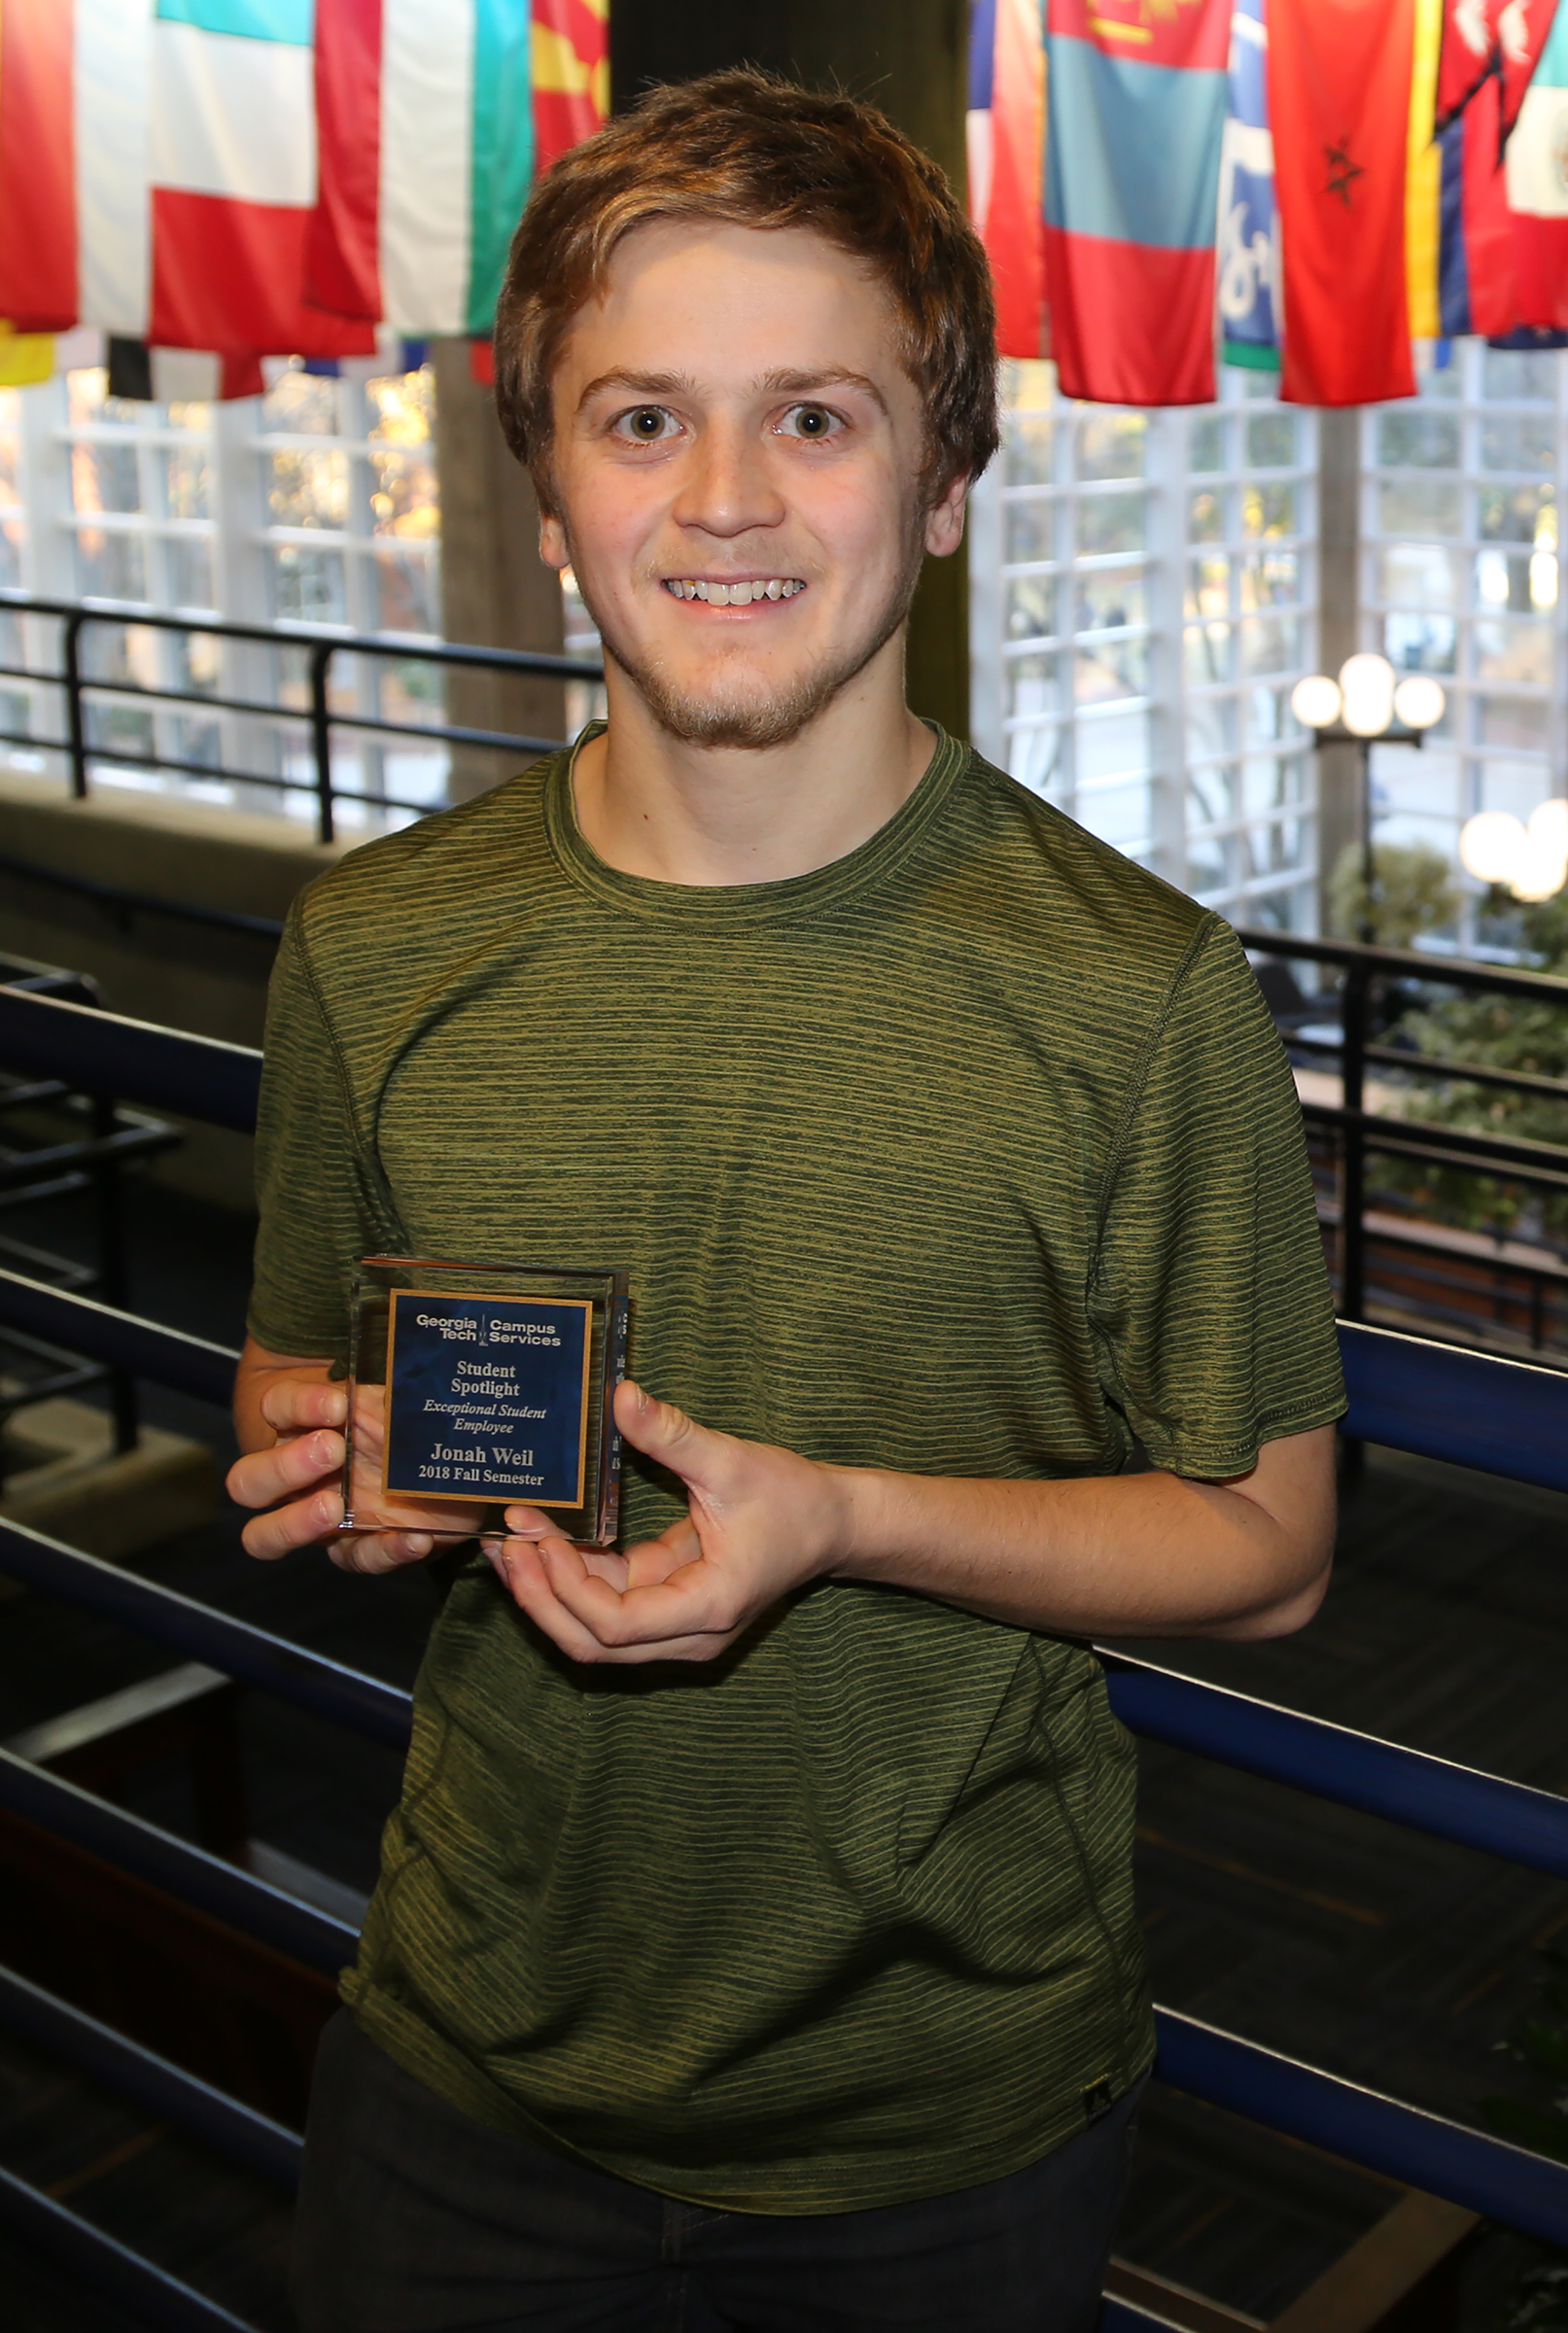 Jonah Weil received Campus Services Student Sportlight Award for Fall Semester 2018.